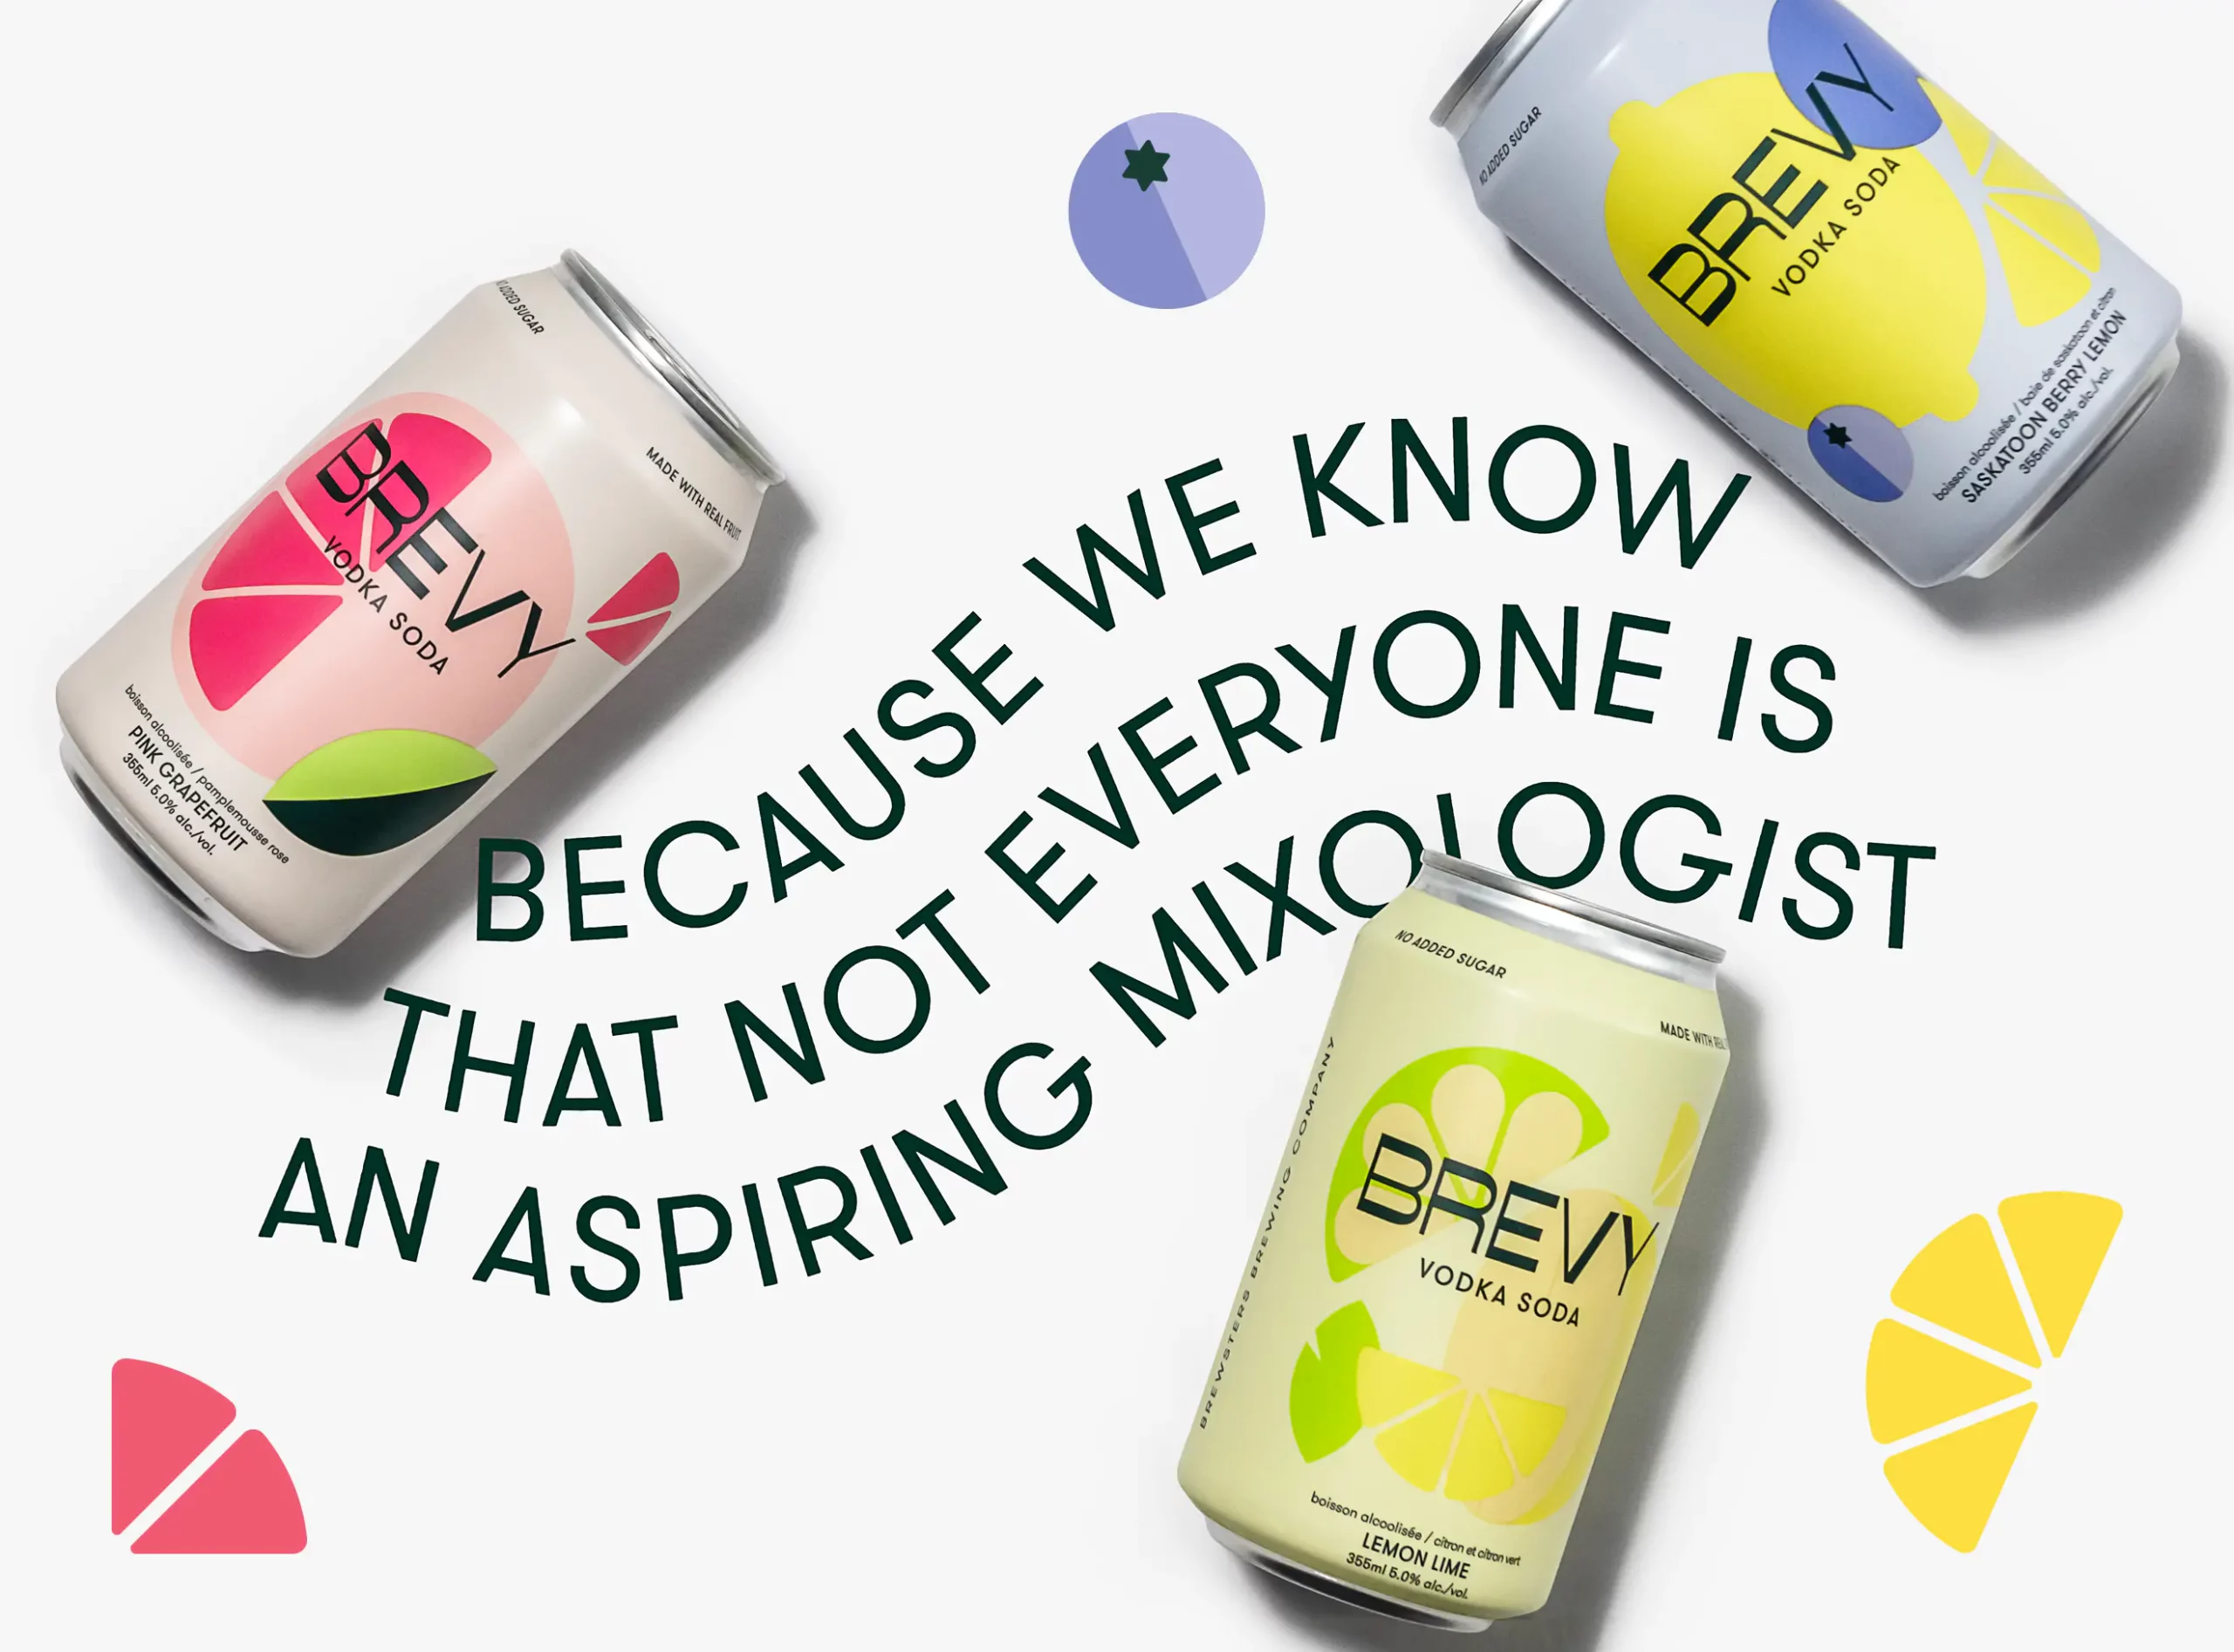 Brevy cans with Text that reads, Becasue we know that not everyone is a mixologist